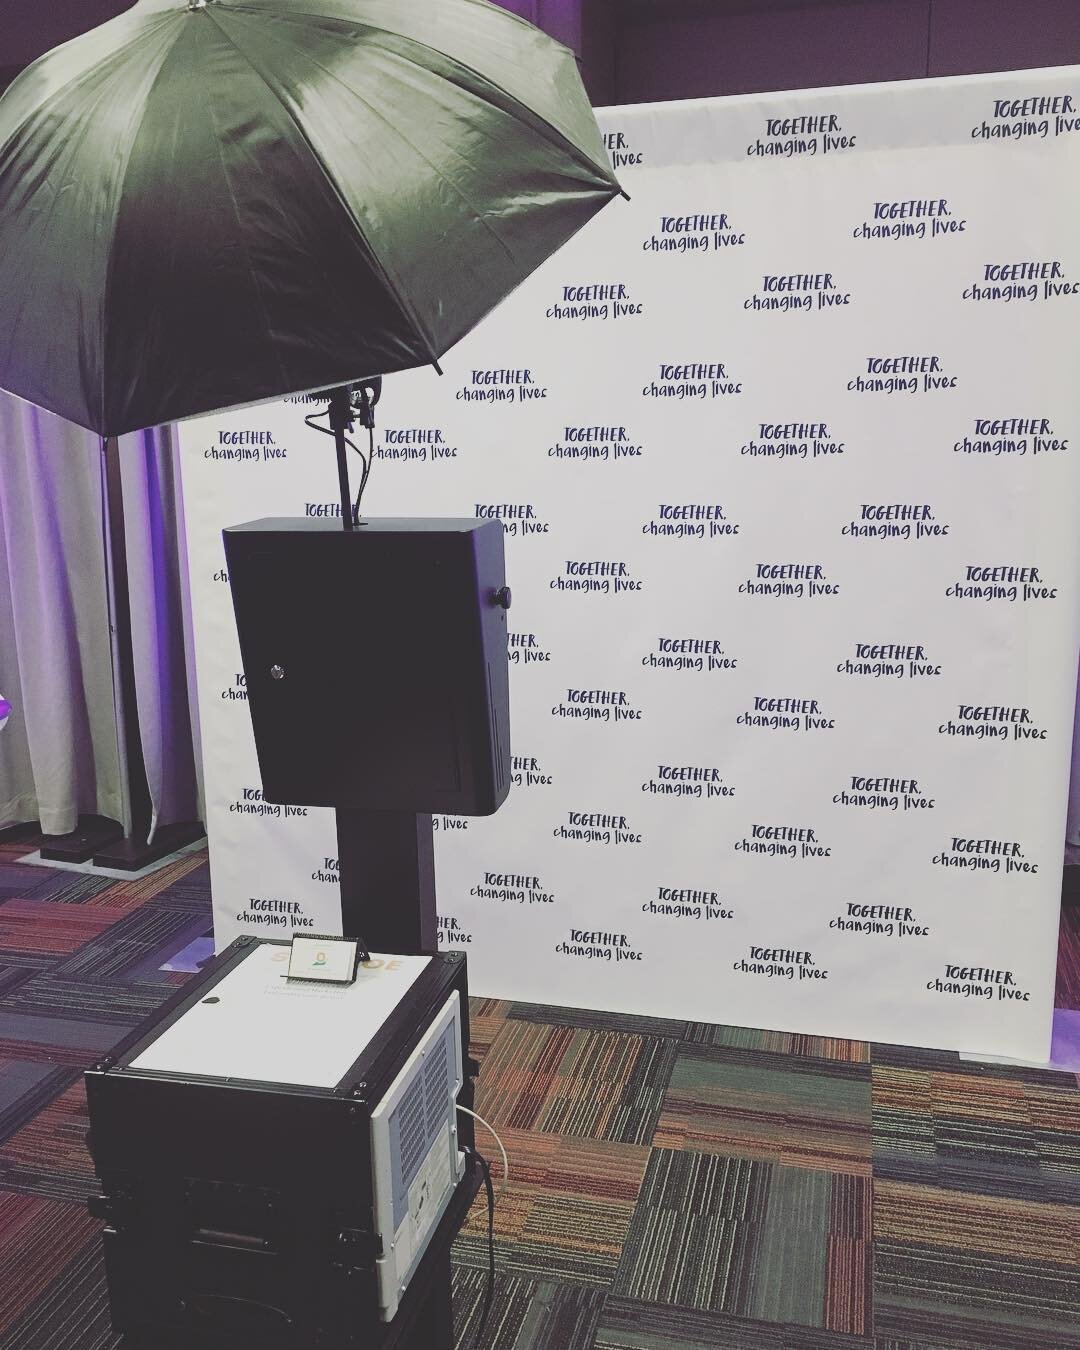 Stop by our #photobooth at @hyattchicago #togetherchanginglives